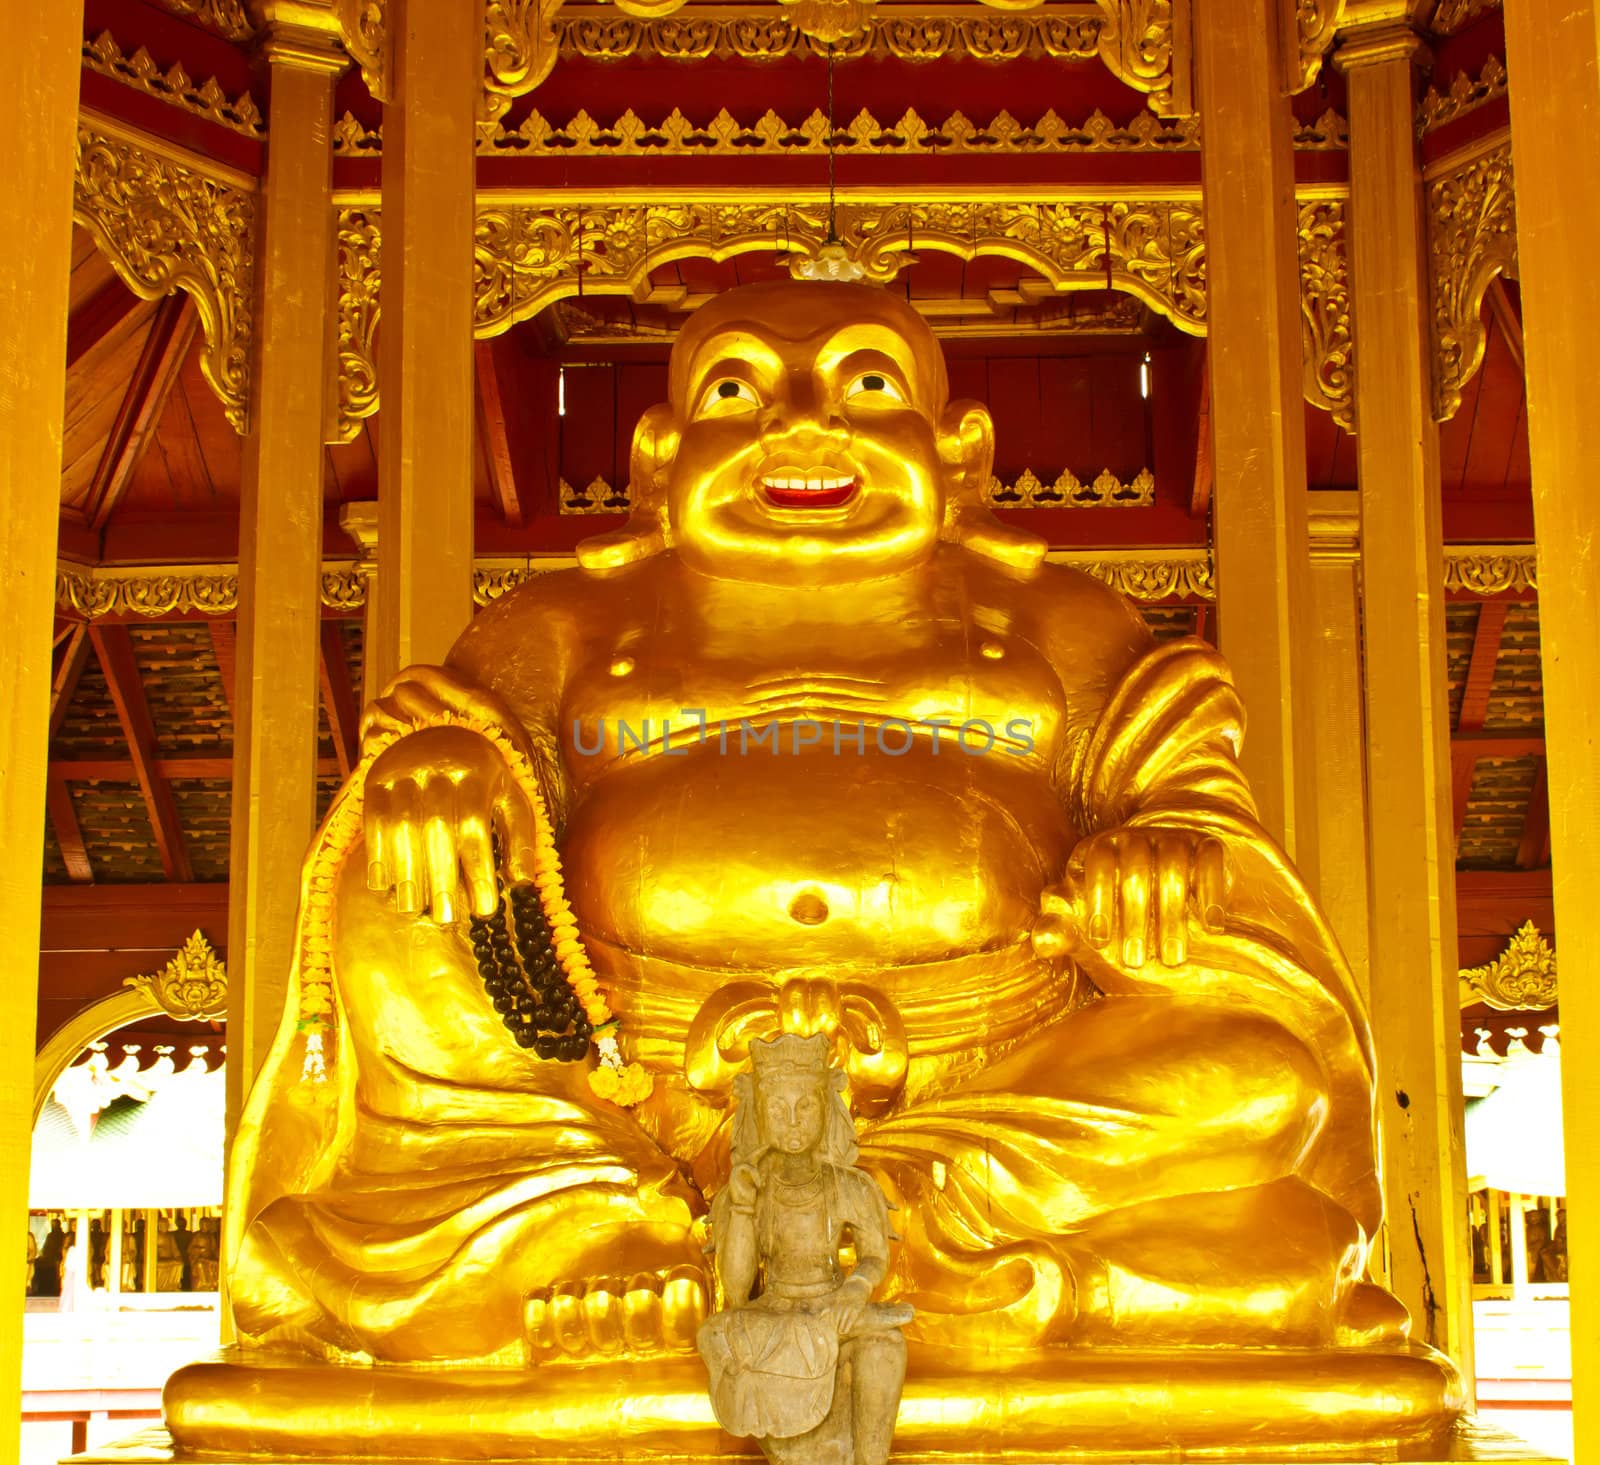 Smiling Golden Buddha Statue, Chinese God of Happiness by singkamc